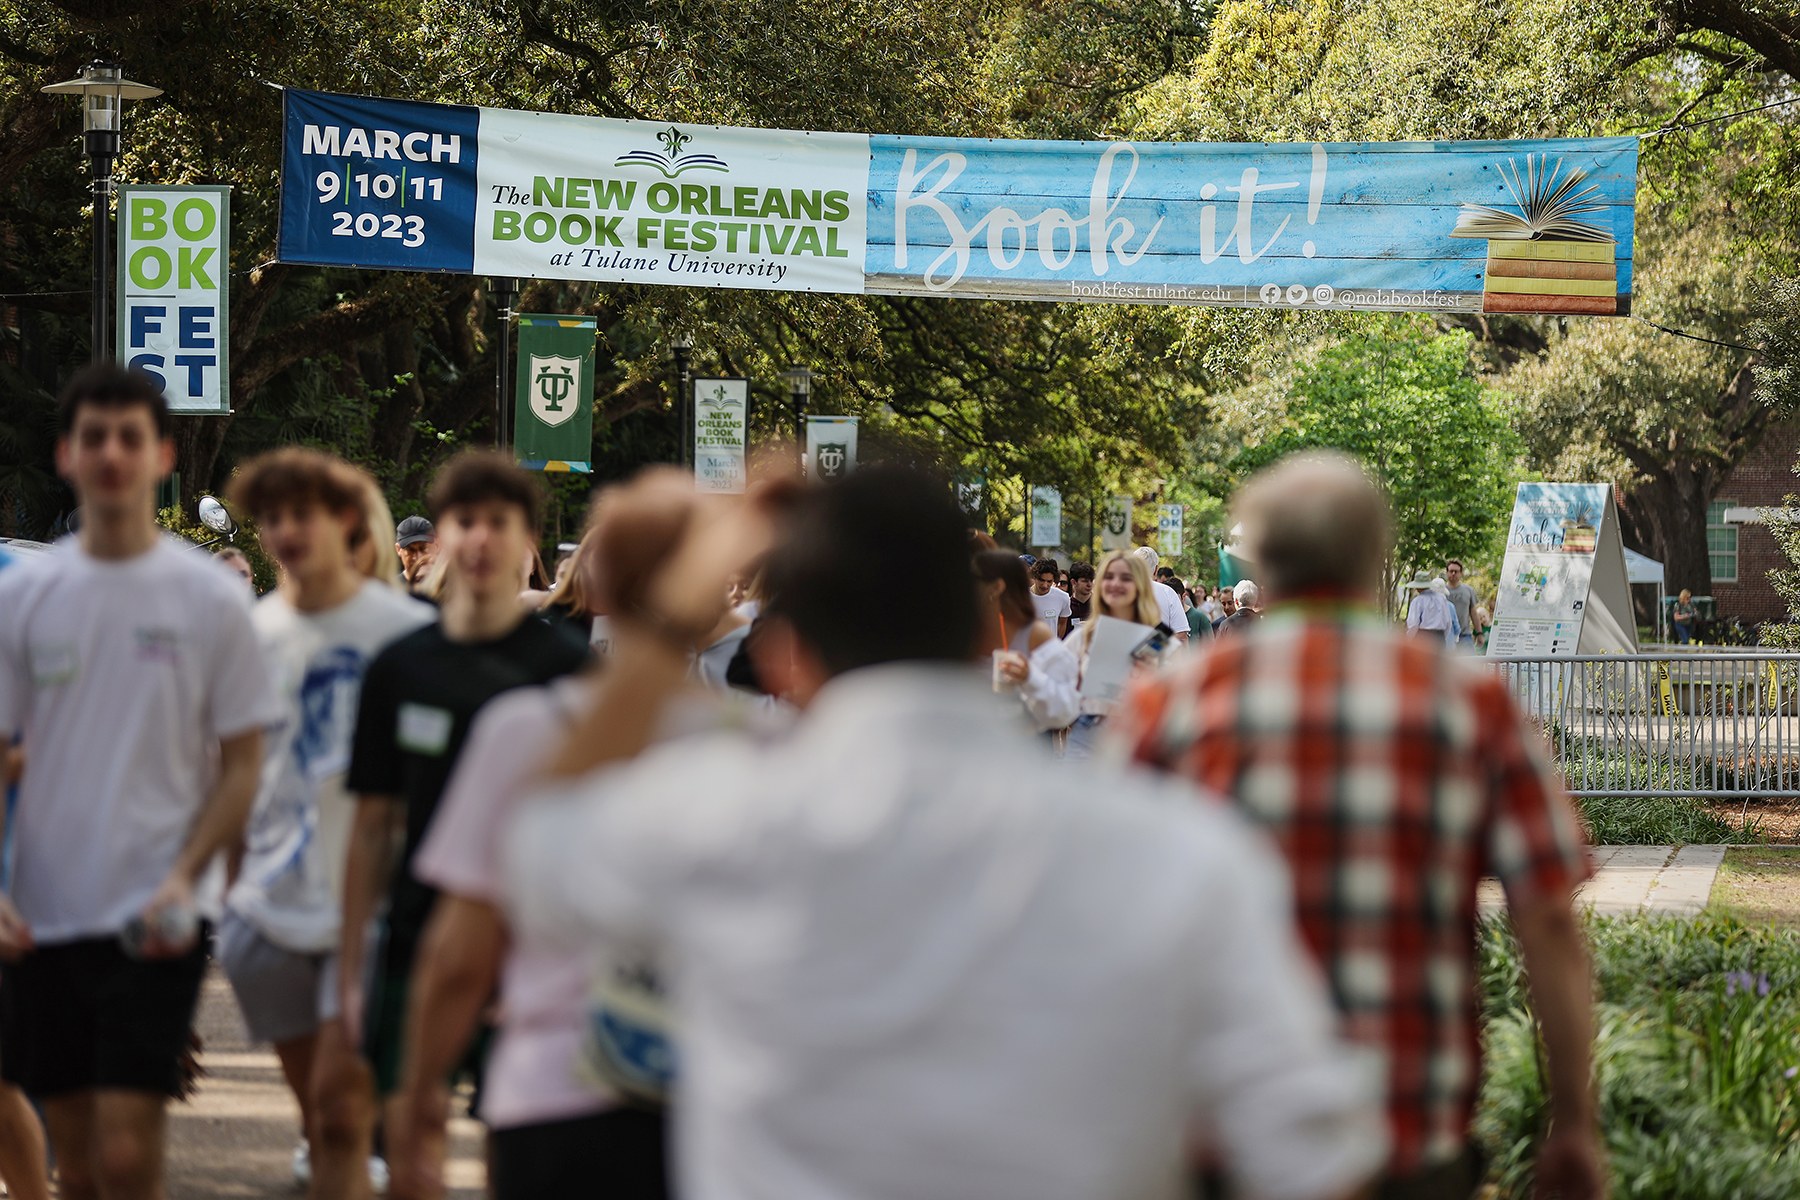 People walking through Tulane's campus under a banner promoting New Orleans Book Festival